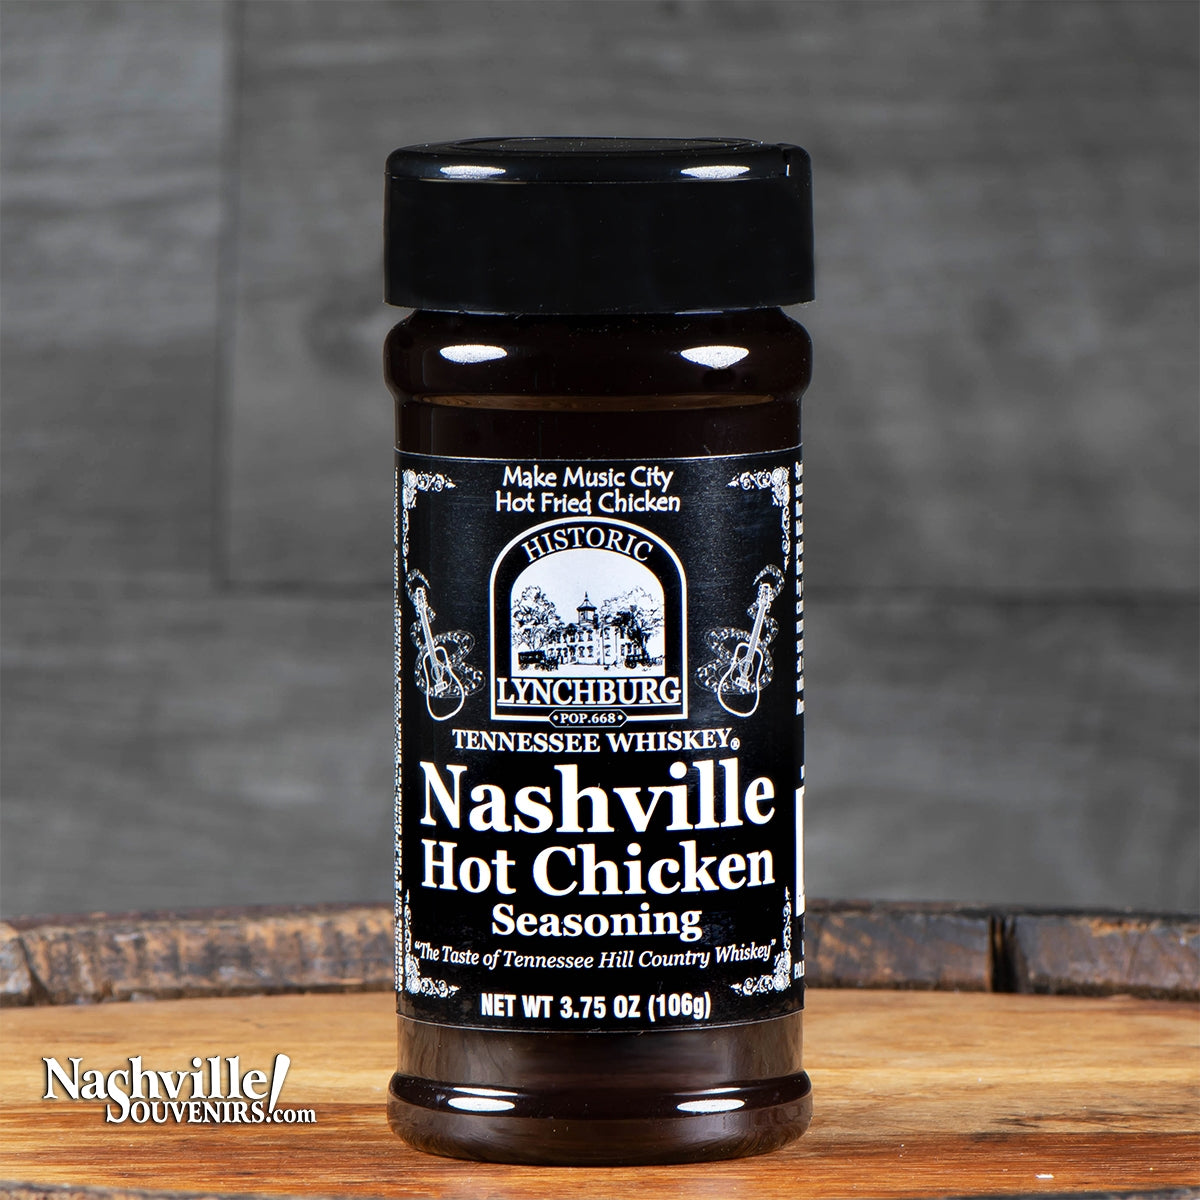 Fire up the grill and your tastebuds with the brand new  Historic Lynchburg Nashville Hot Chicken Seasoning containing real Jack Daniels Black Label whiskey. Nashville Hot Chicken done Jack Daniels style! FREE SHIPPING on all US orders over $75!